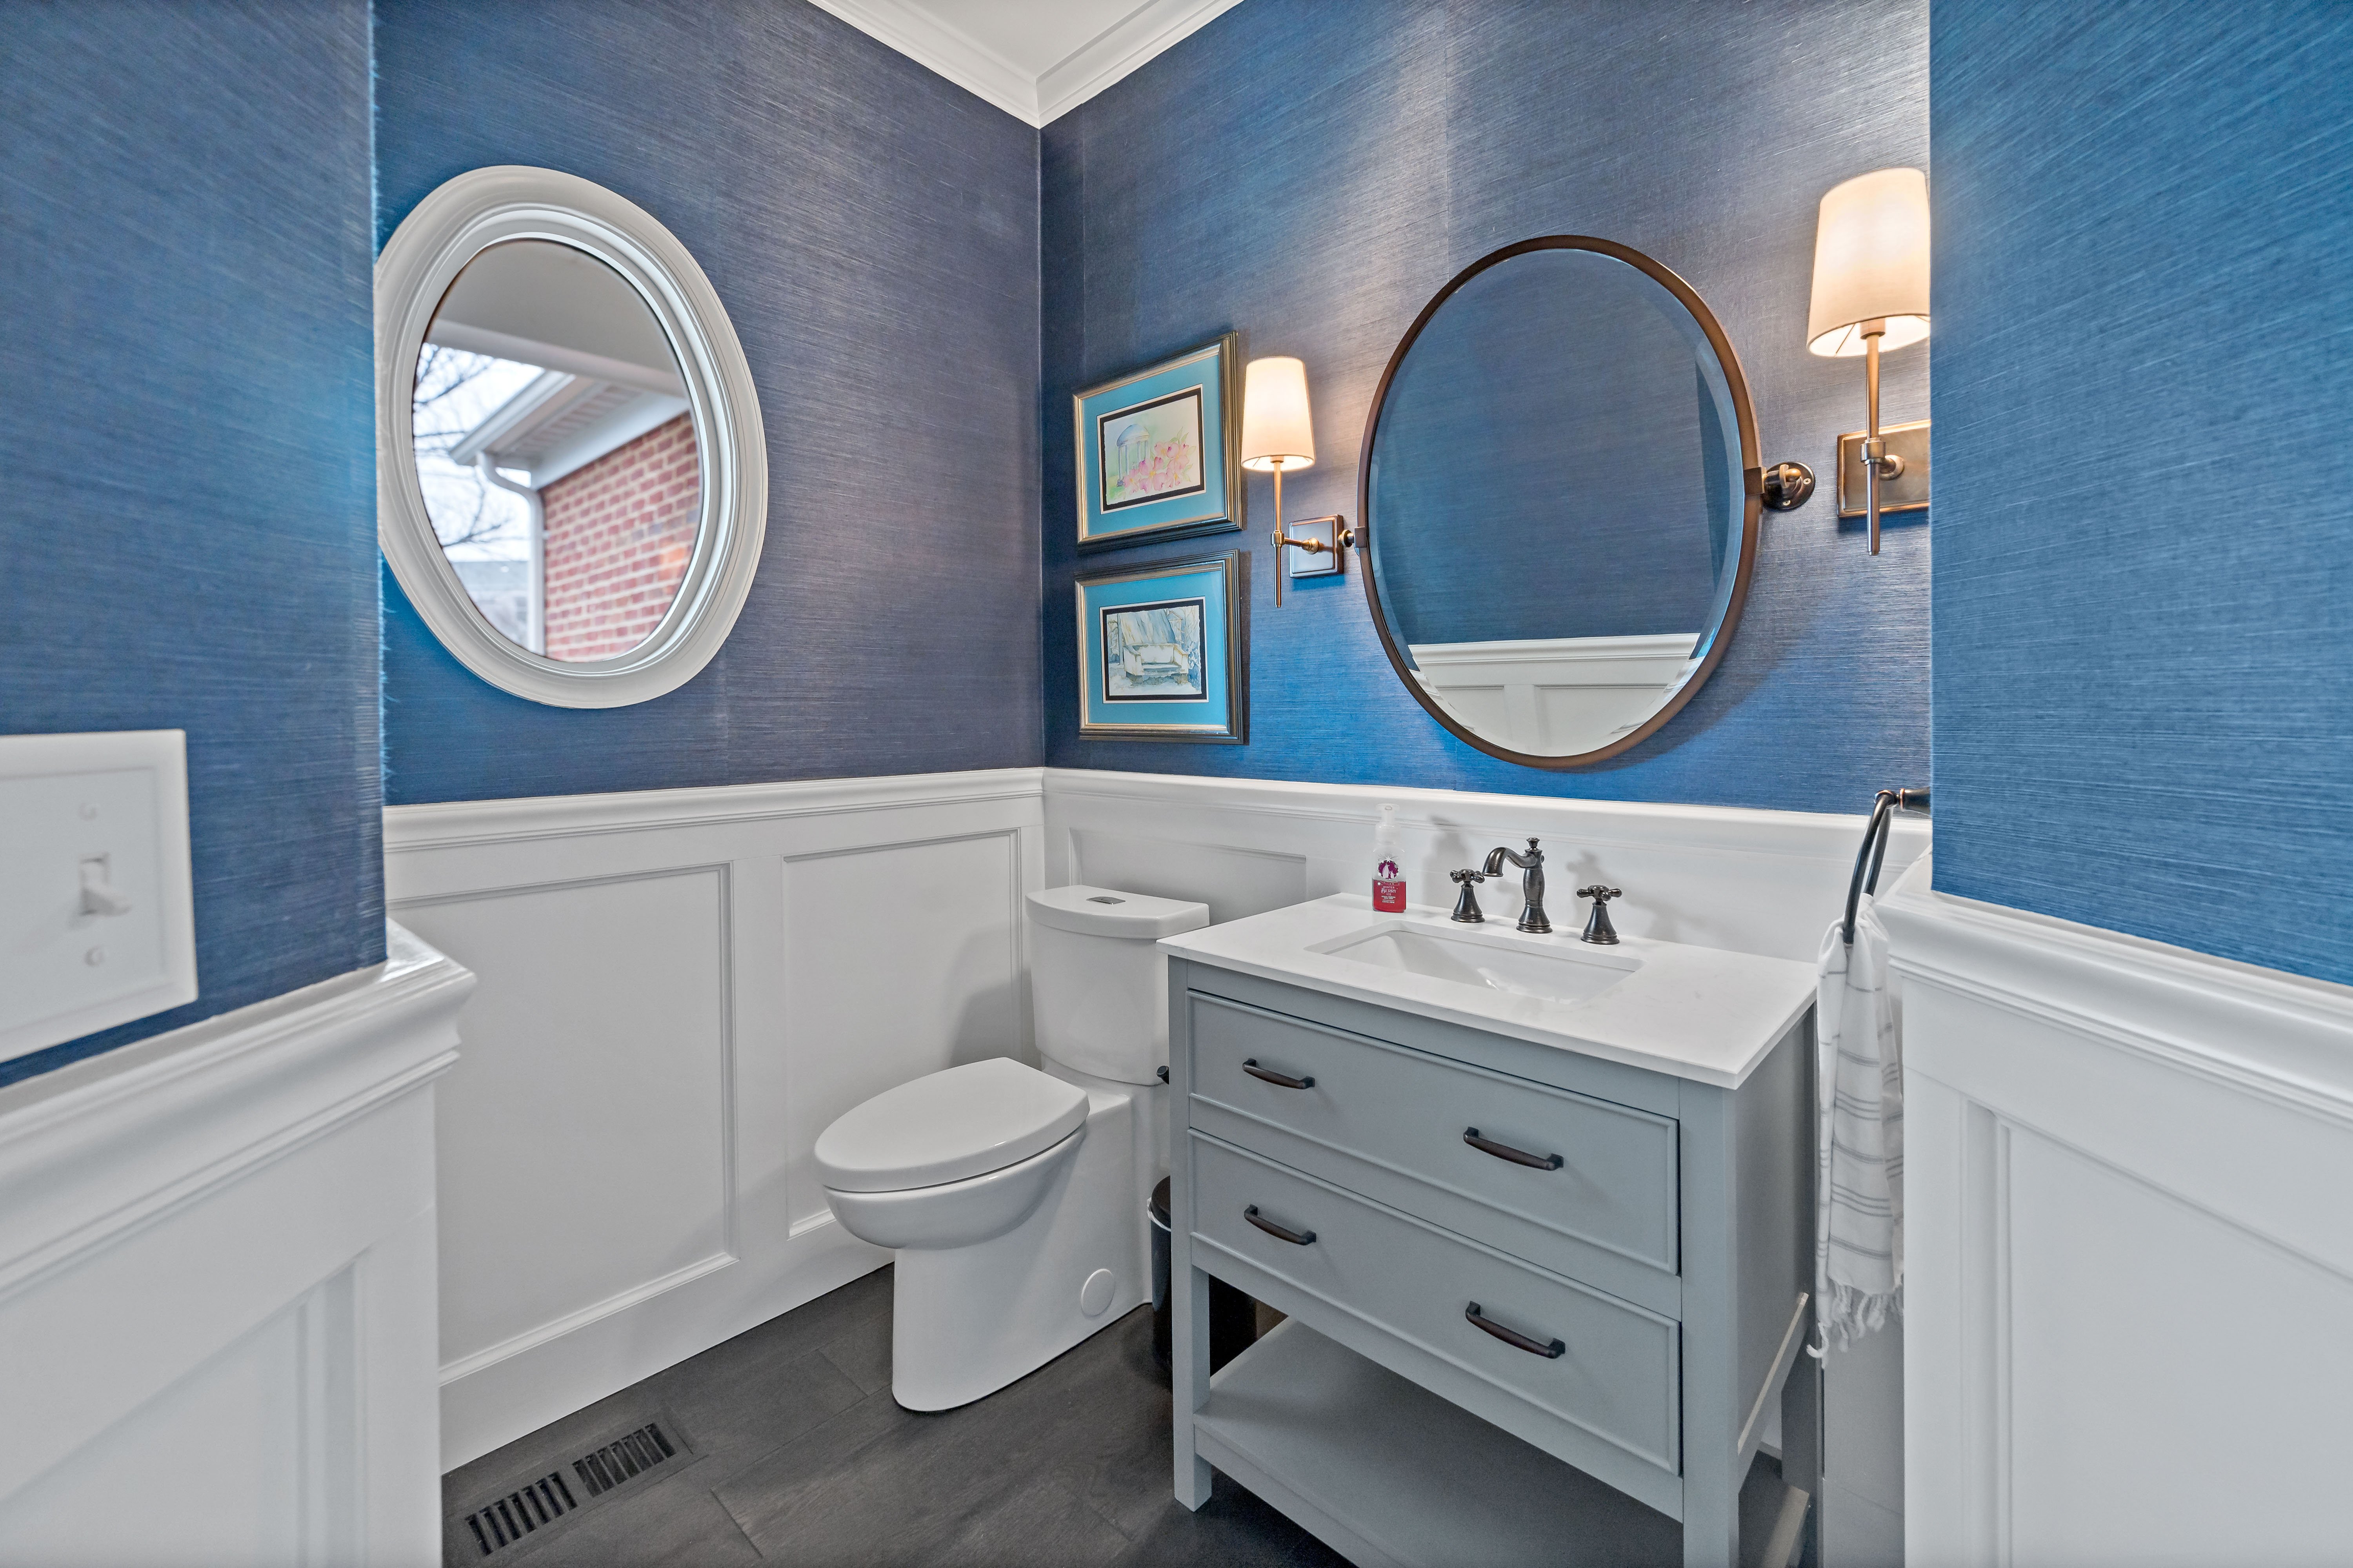 Small bathroom with circular mirror and blue and white walls